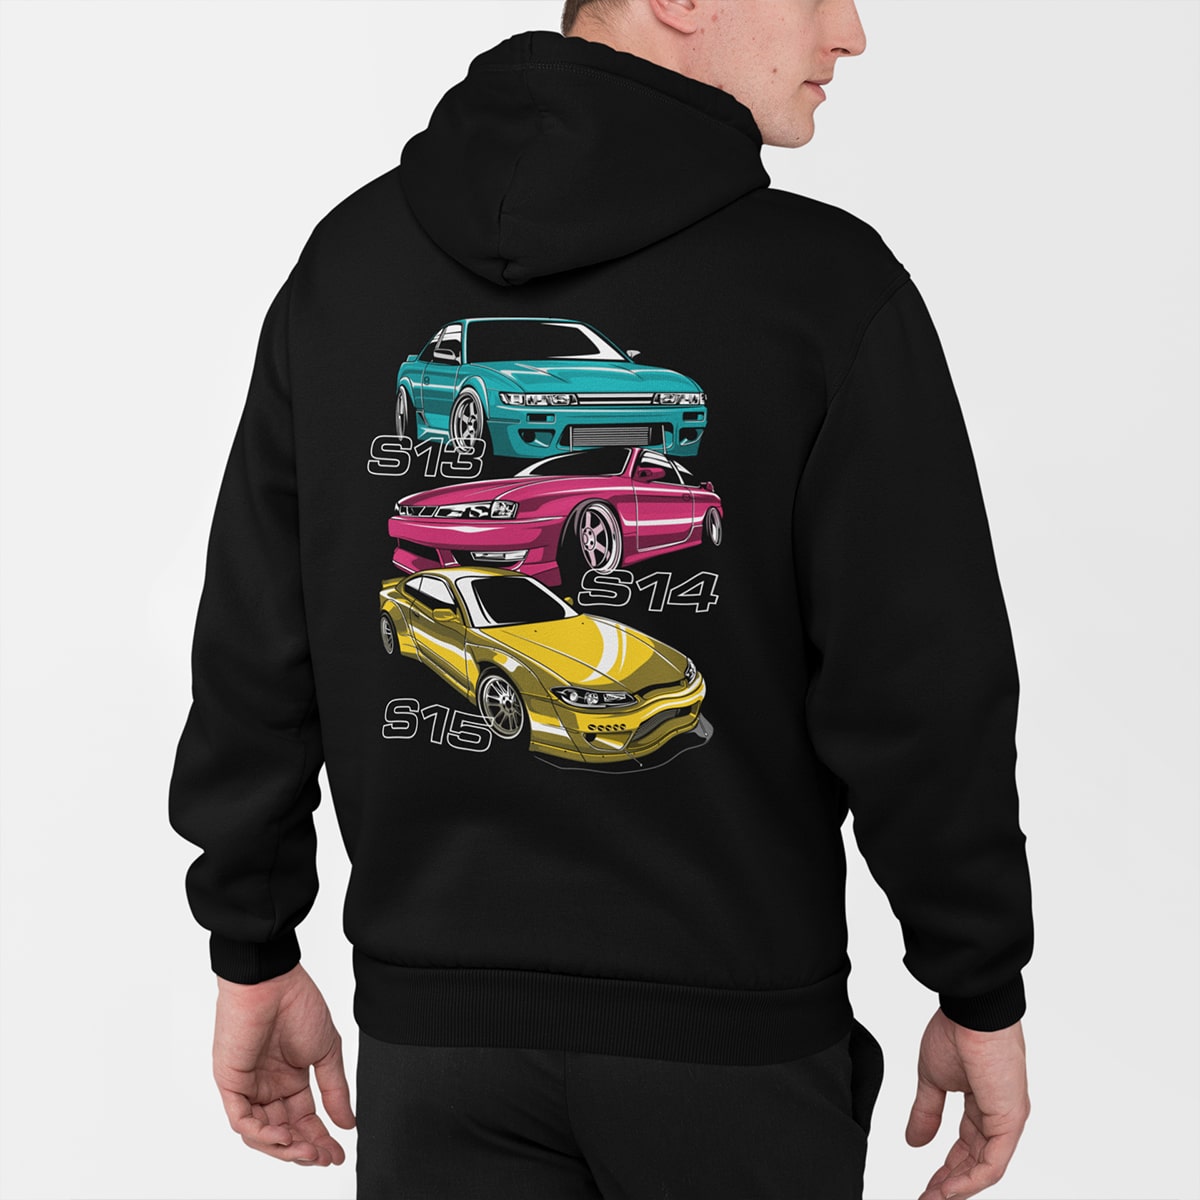 S Chassis Generation Car Hoodie. Nissan Silvia S13, S14, and S15. Black.